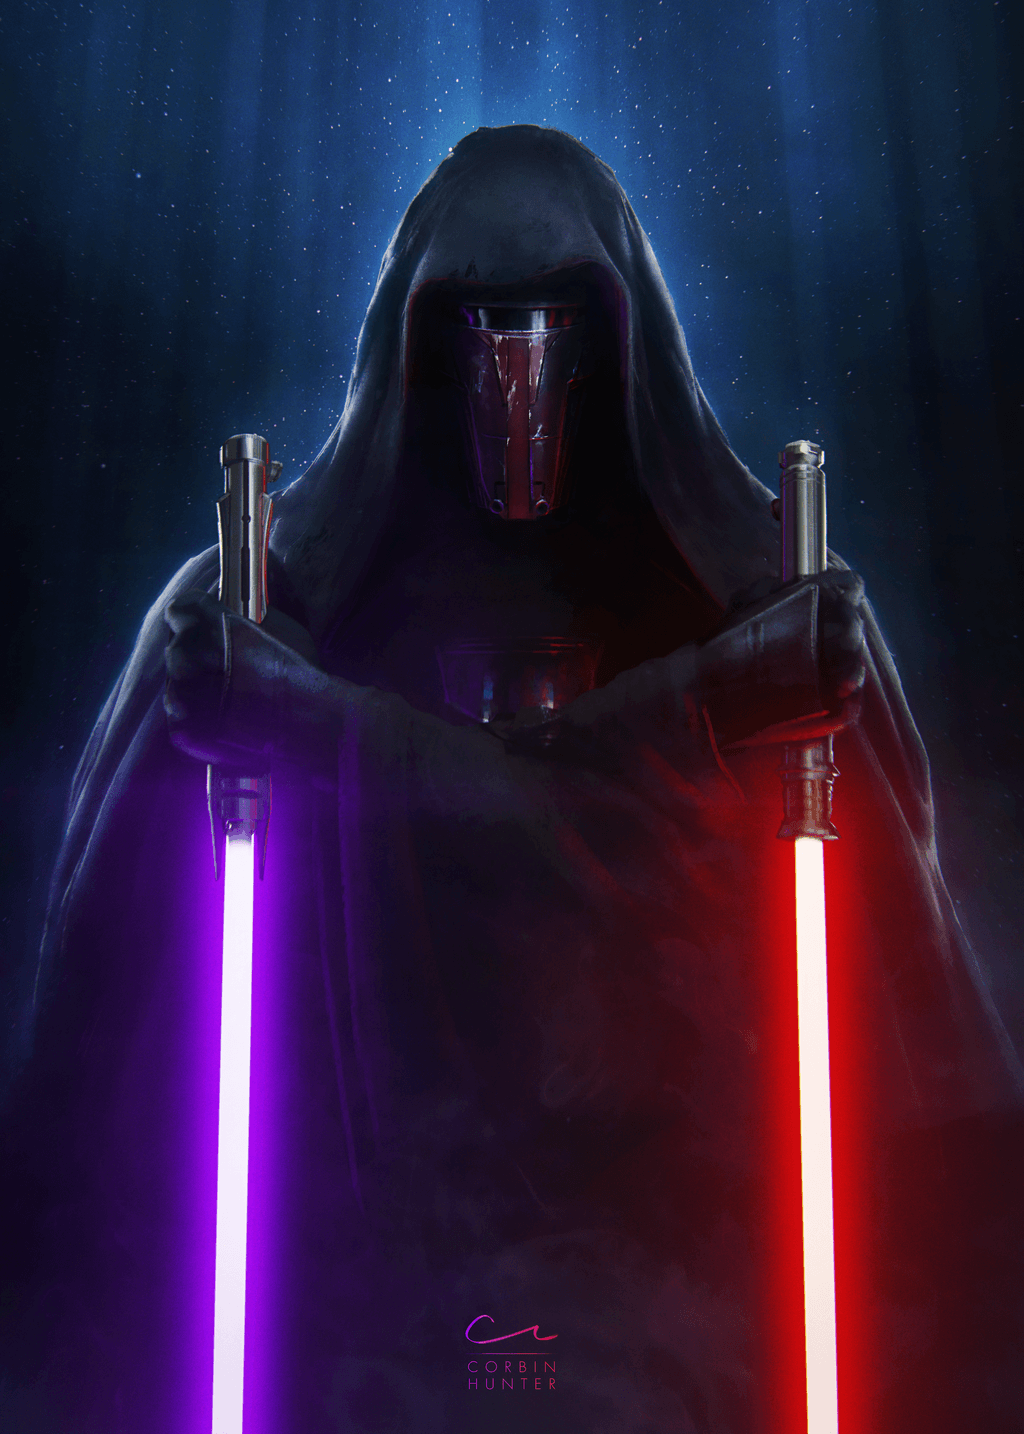 Sith Star Wars Phone Wallpapers Top Free Sith Star Wars